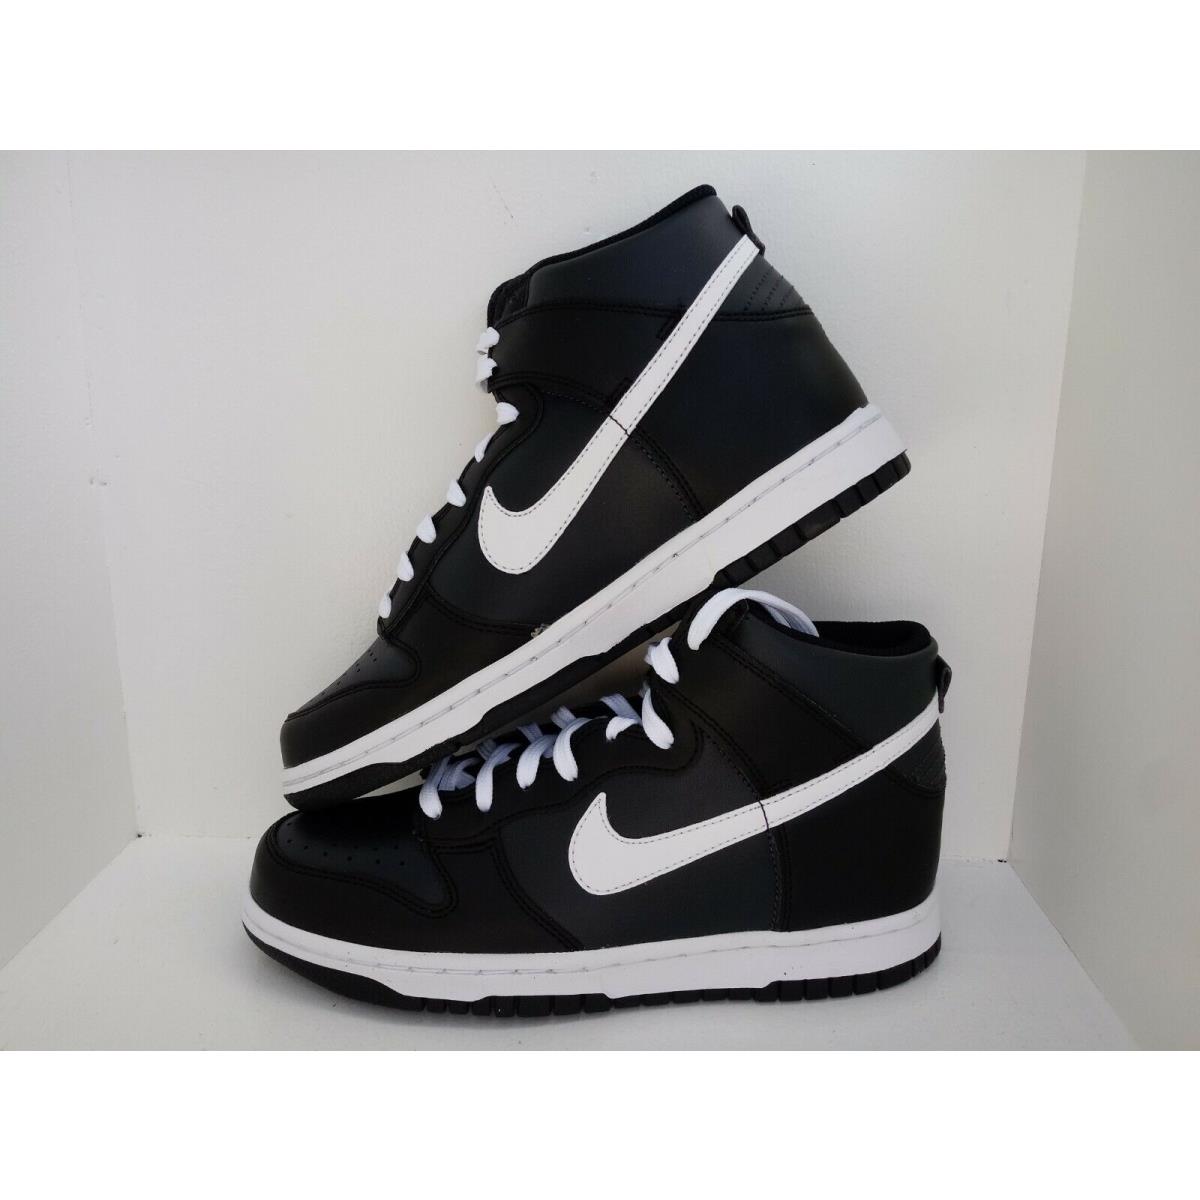 Nike shoes Dunk High - Anthracite/White-Black 1